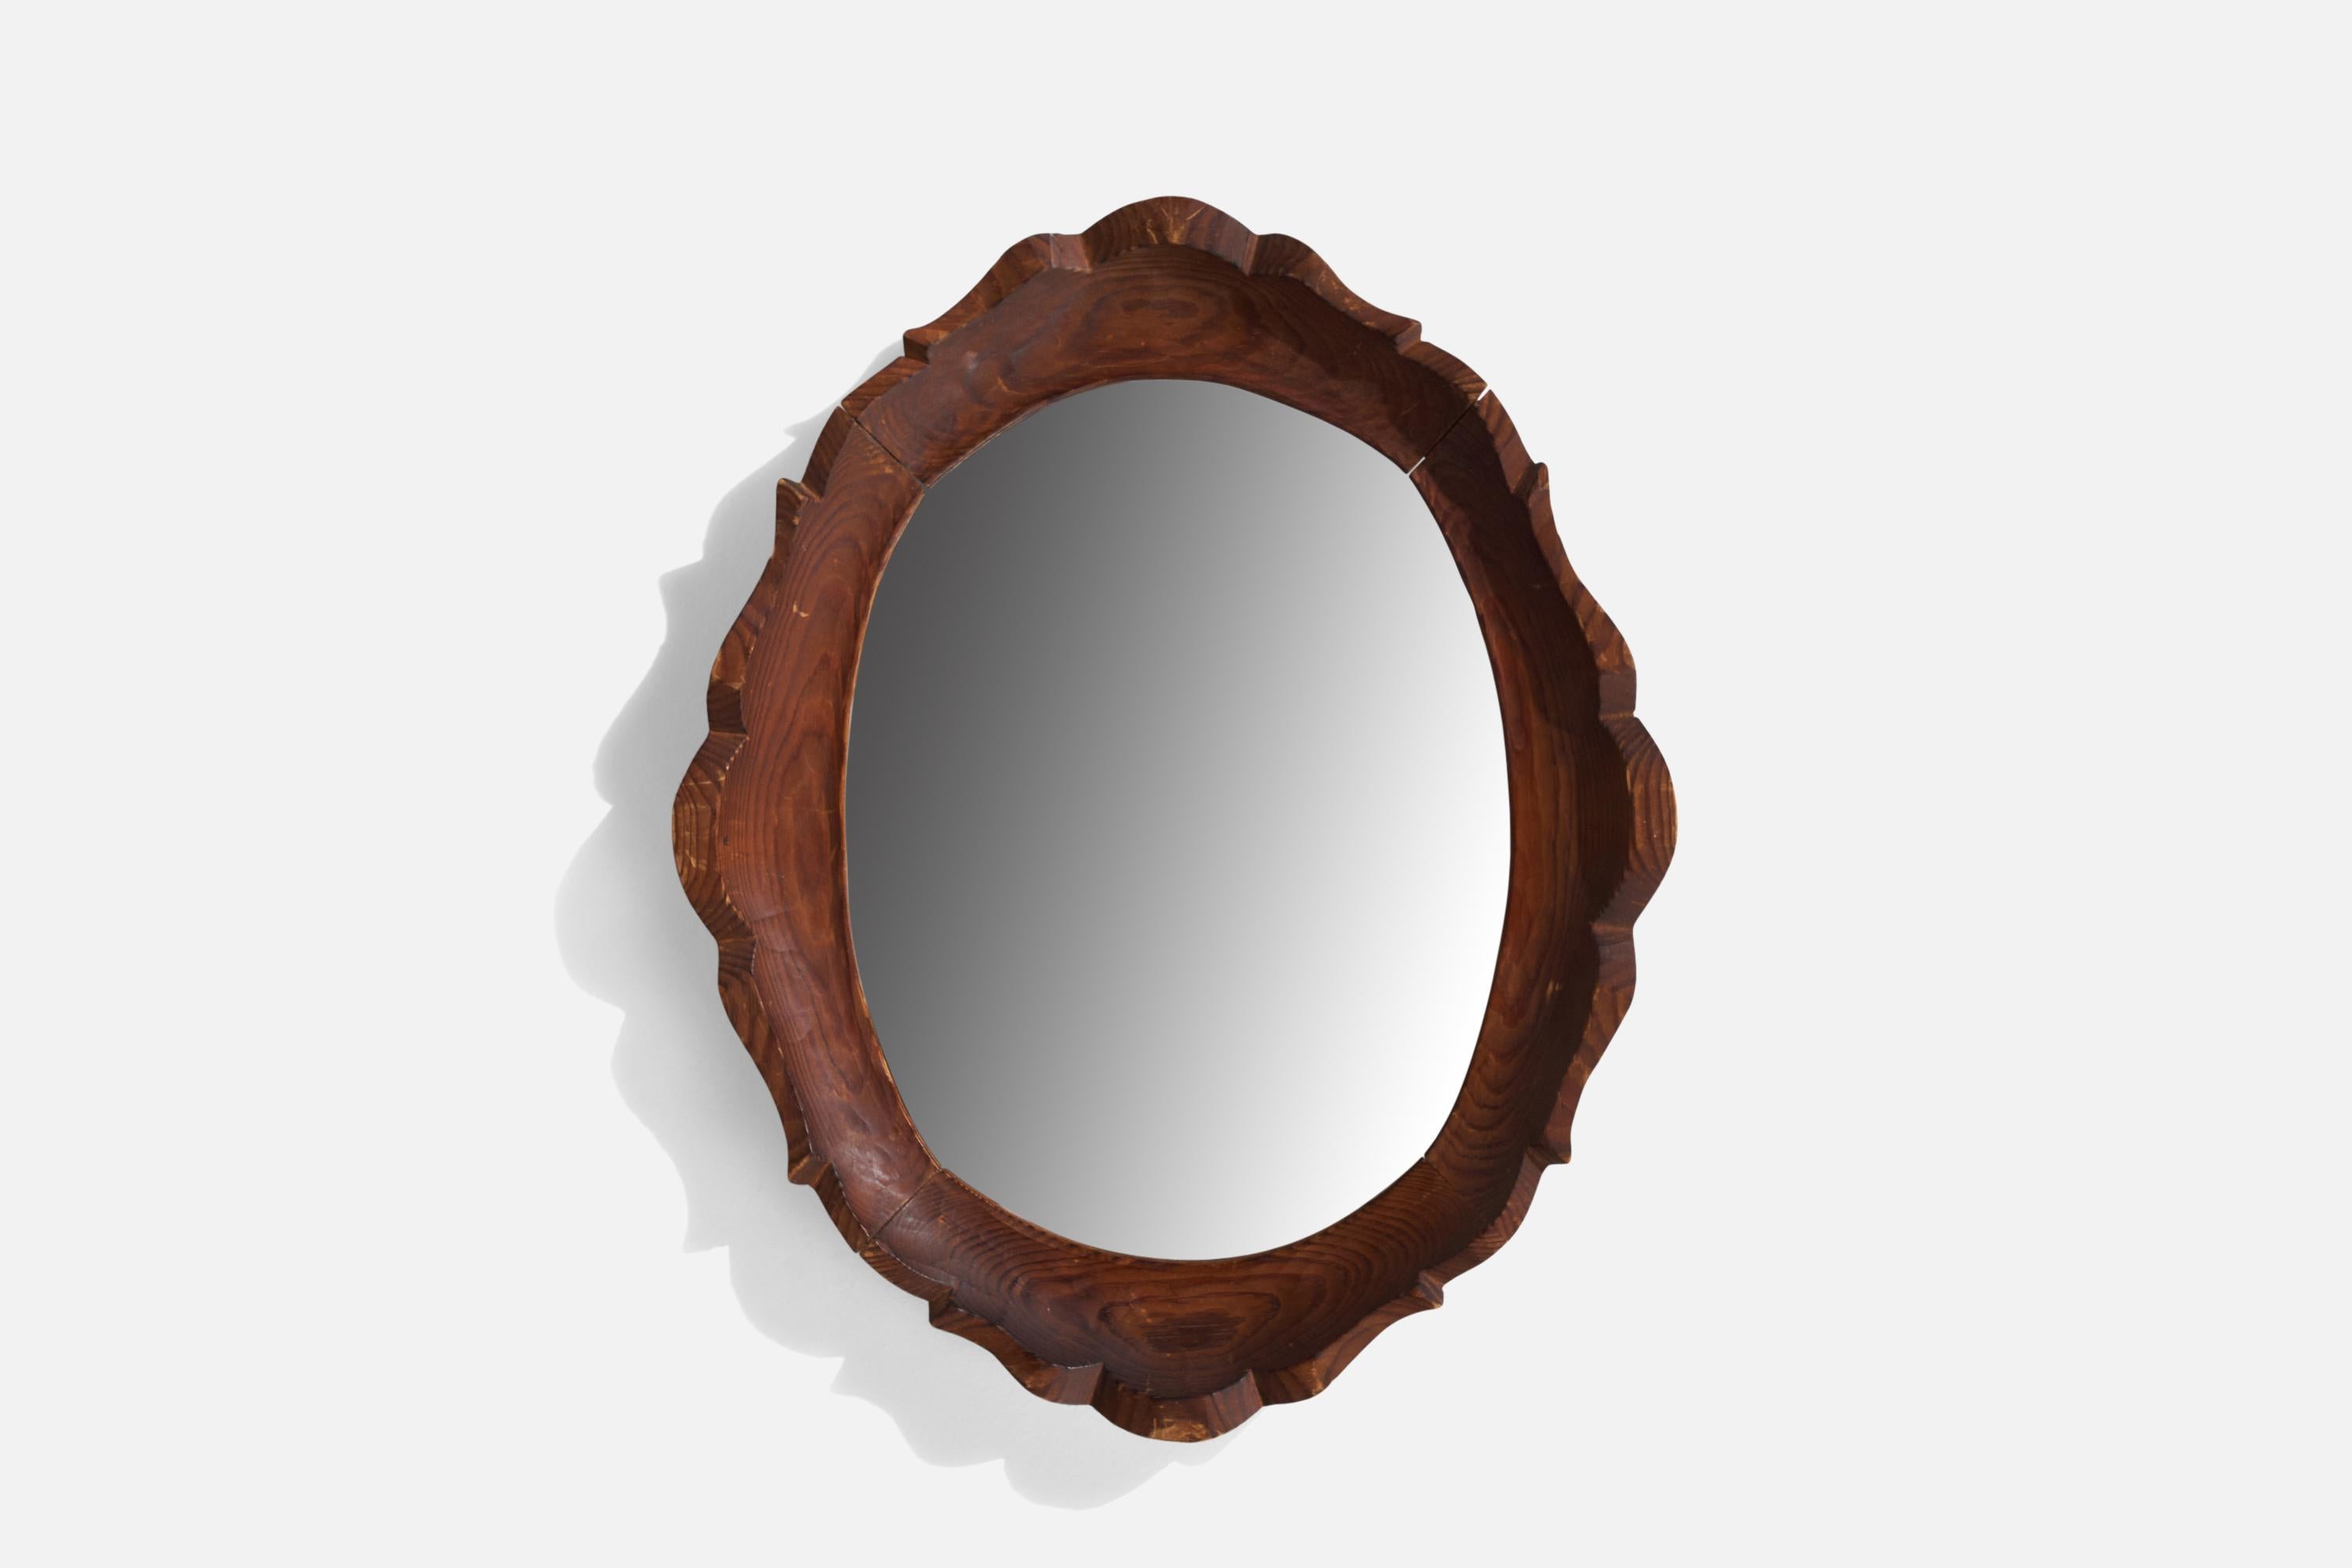 A carved pine wall mirror designed and produced by Bo Fjæstad, Arvika, Sweden, c. 1930s.